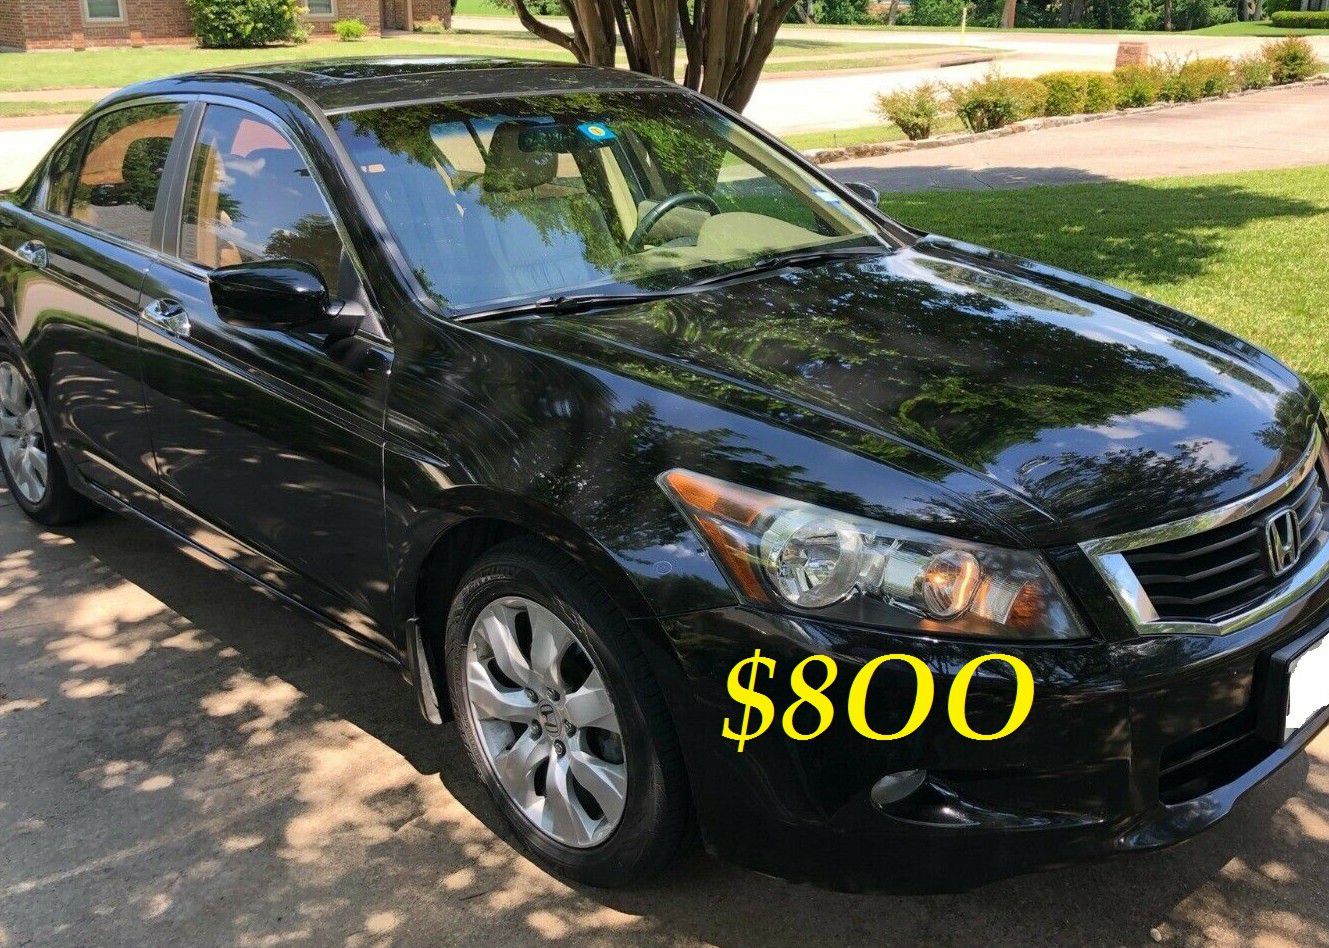 💝✅$8OO URGENT I sell my family car 2OO9 Honda Accord EX-L Everything is working great!💕💝 Runs great and fun to drive!!🟢🎁